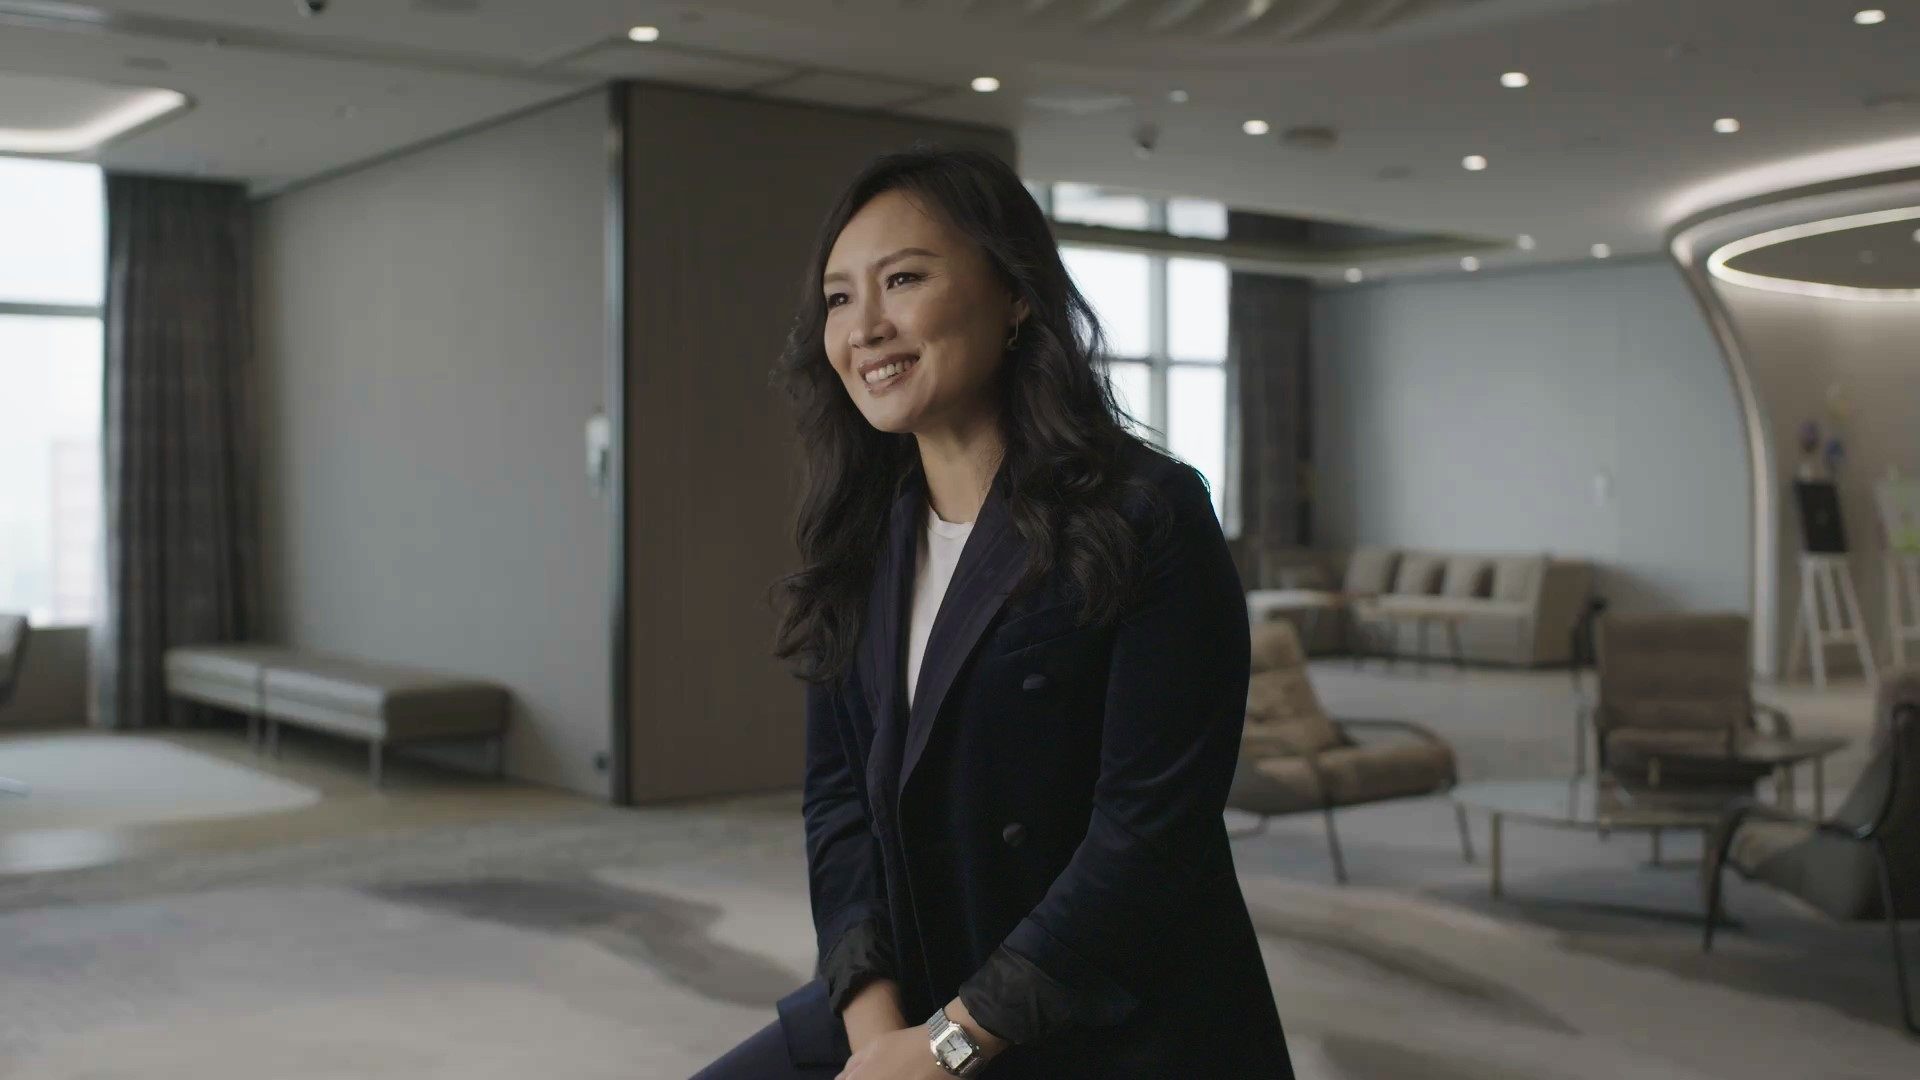 Jennifer Zhu Scott runs her tech investment platform IN. Capital from Hong Kong, which has been her home for 22 years.